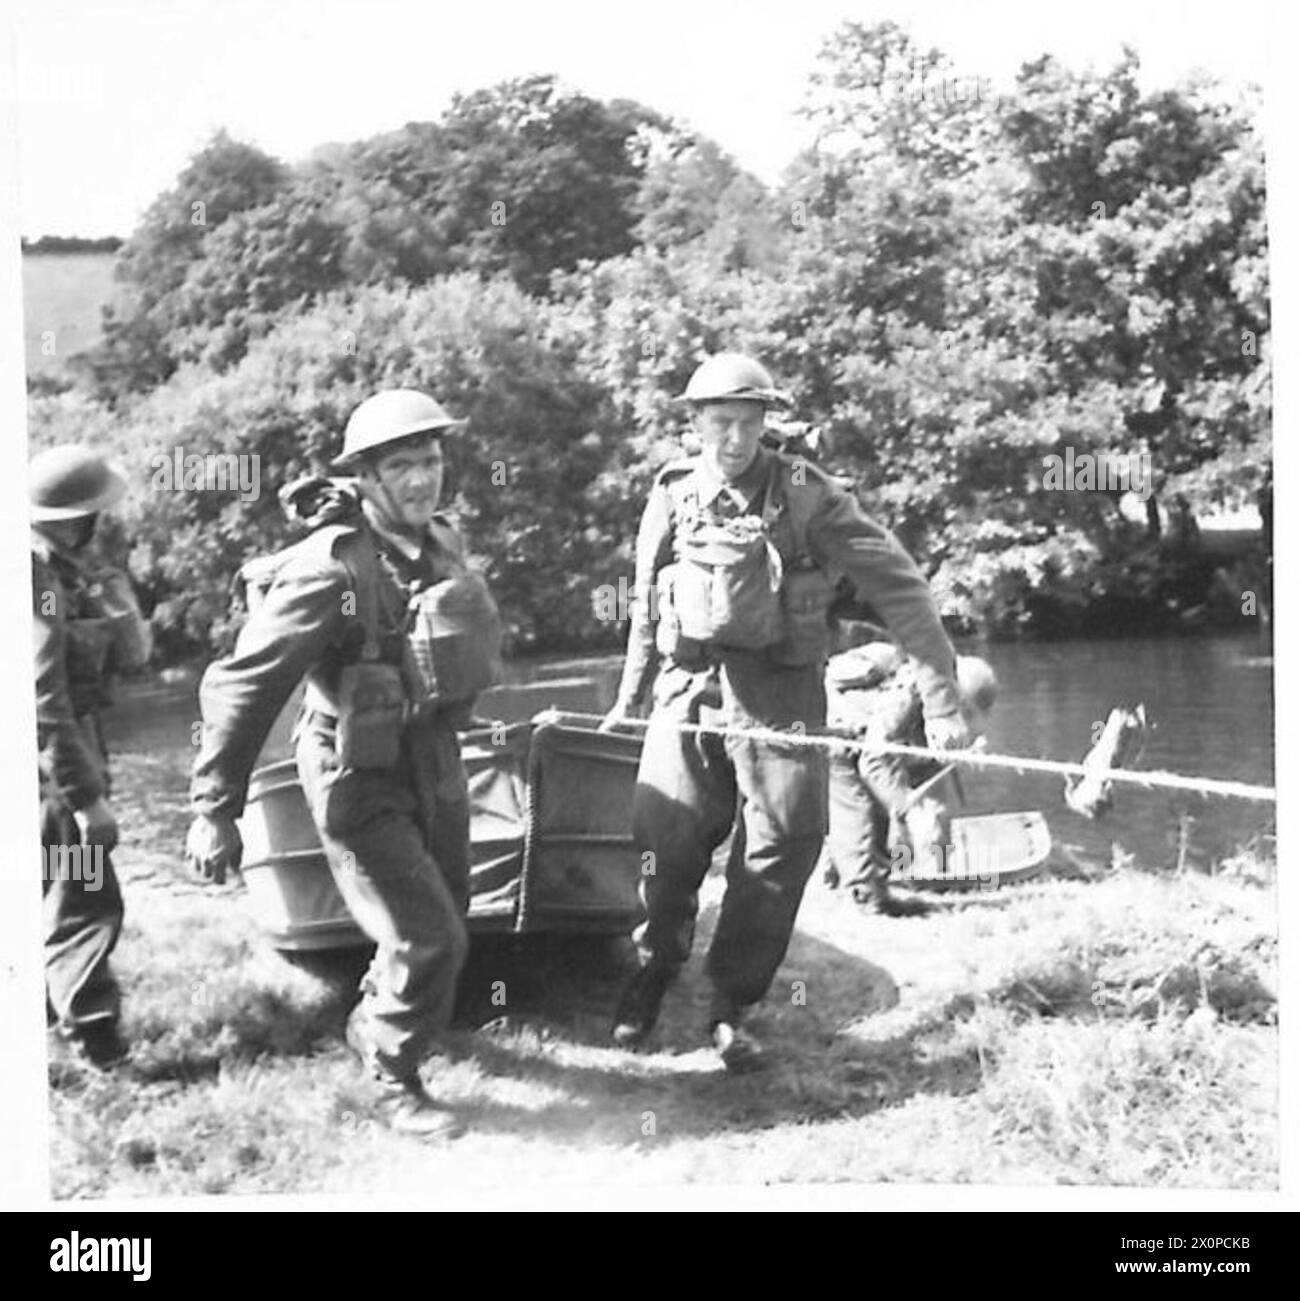 A COMBINED ARMY AND HOME GUARD EXERCISE - Home Guards embarking under the watchful eye of the Royal Marines who were in charge of the embarkation of Home Guards to cross the river in assault boats. Photographic negative , British Army Stock Photo